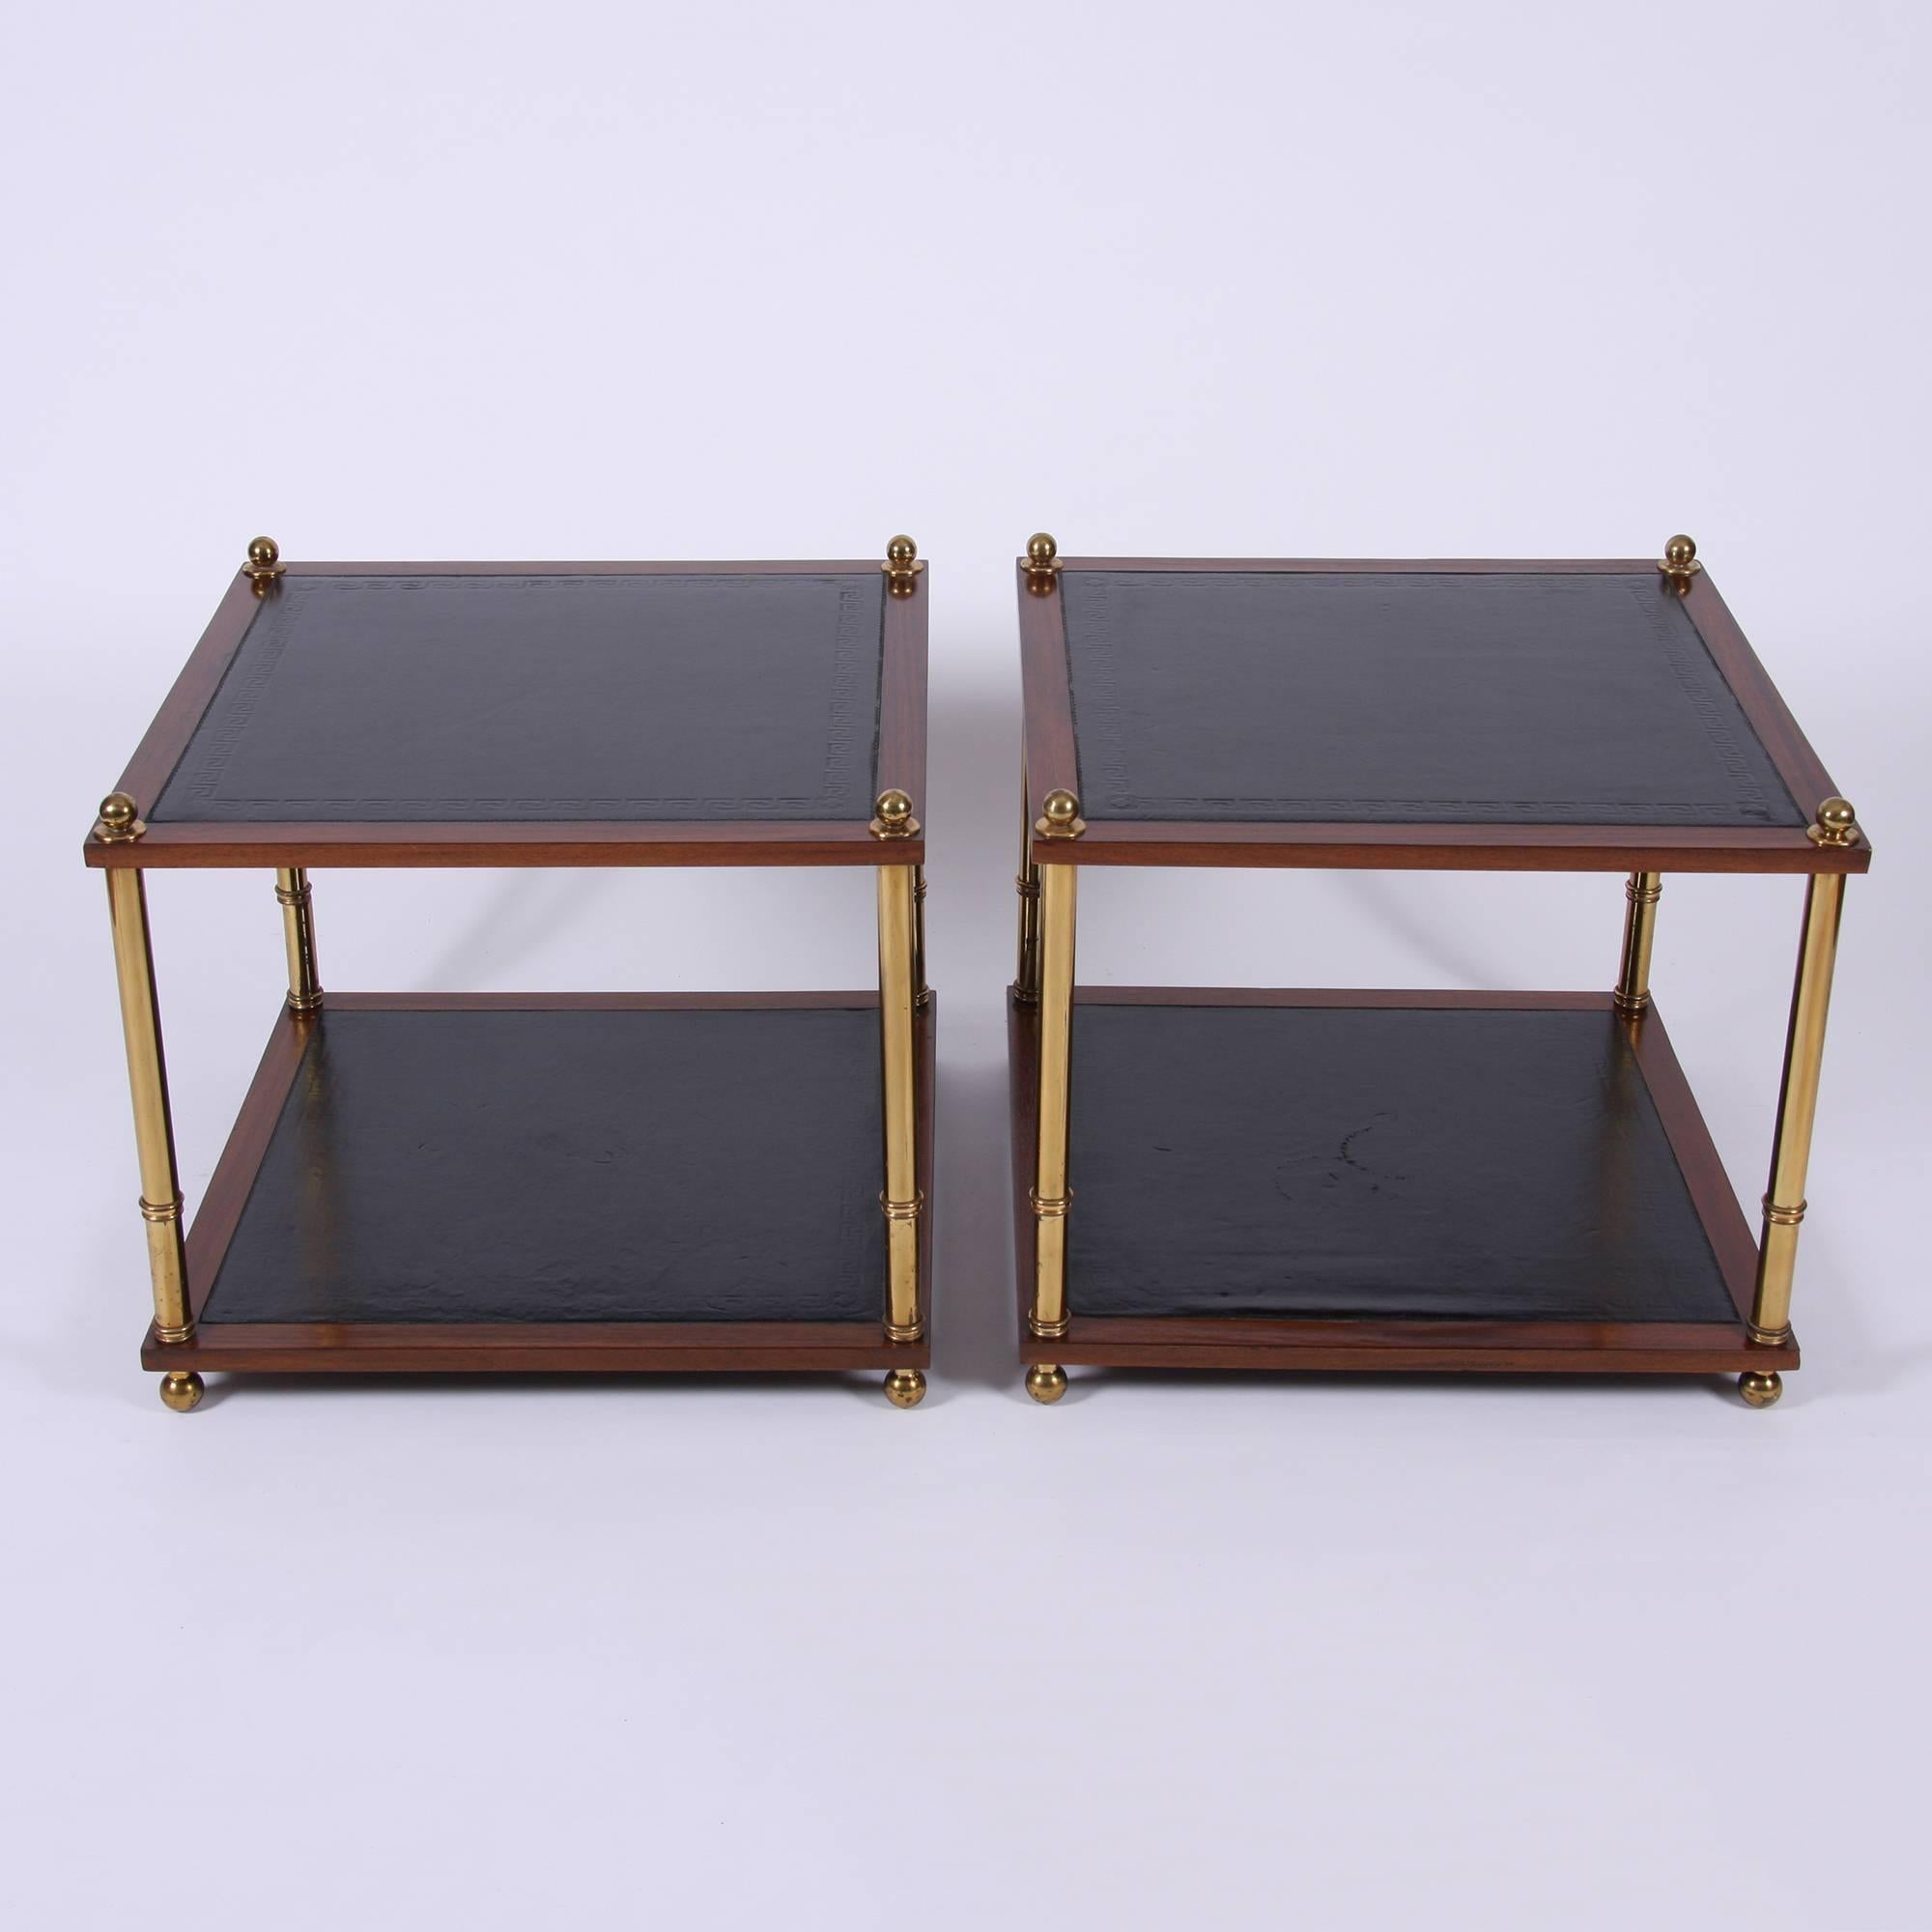 French, circa 1960

A pair of two-tier brass and hardwood side tables. Two-tier with black leather tops with a Greek key design.